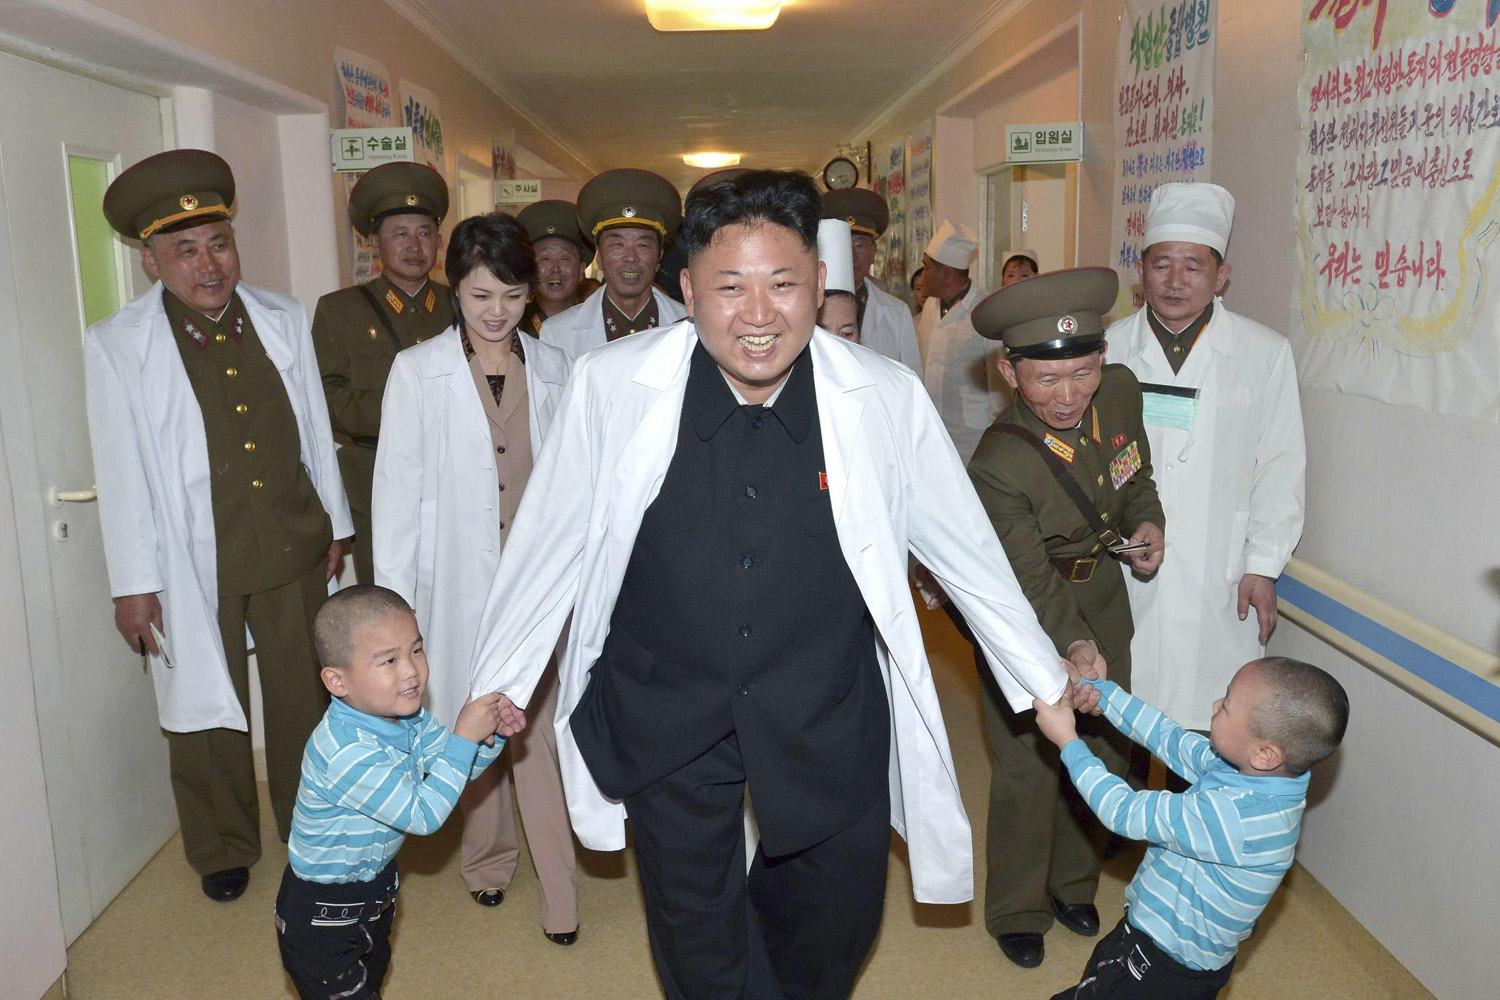 North Korean leader Kim Jong Un plays with children during a visit to the Taesongsan General Hospital in this undated photo released on May 19, 2014.